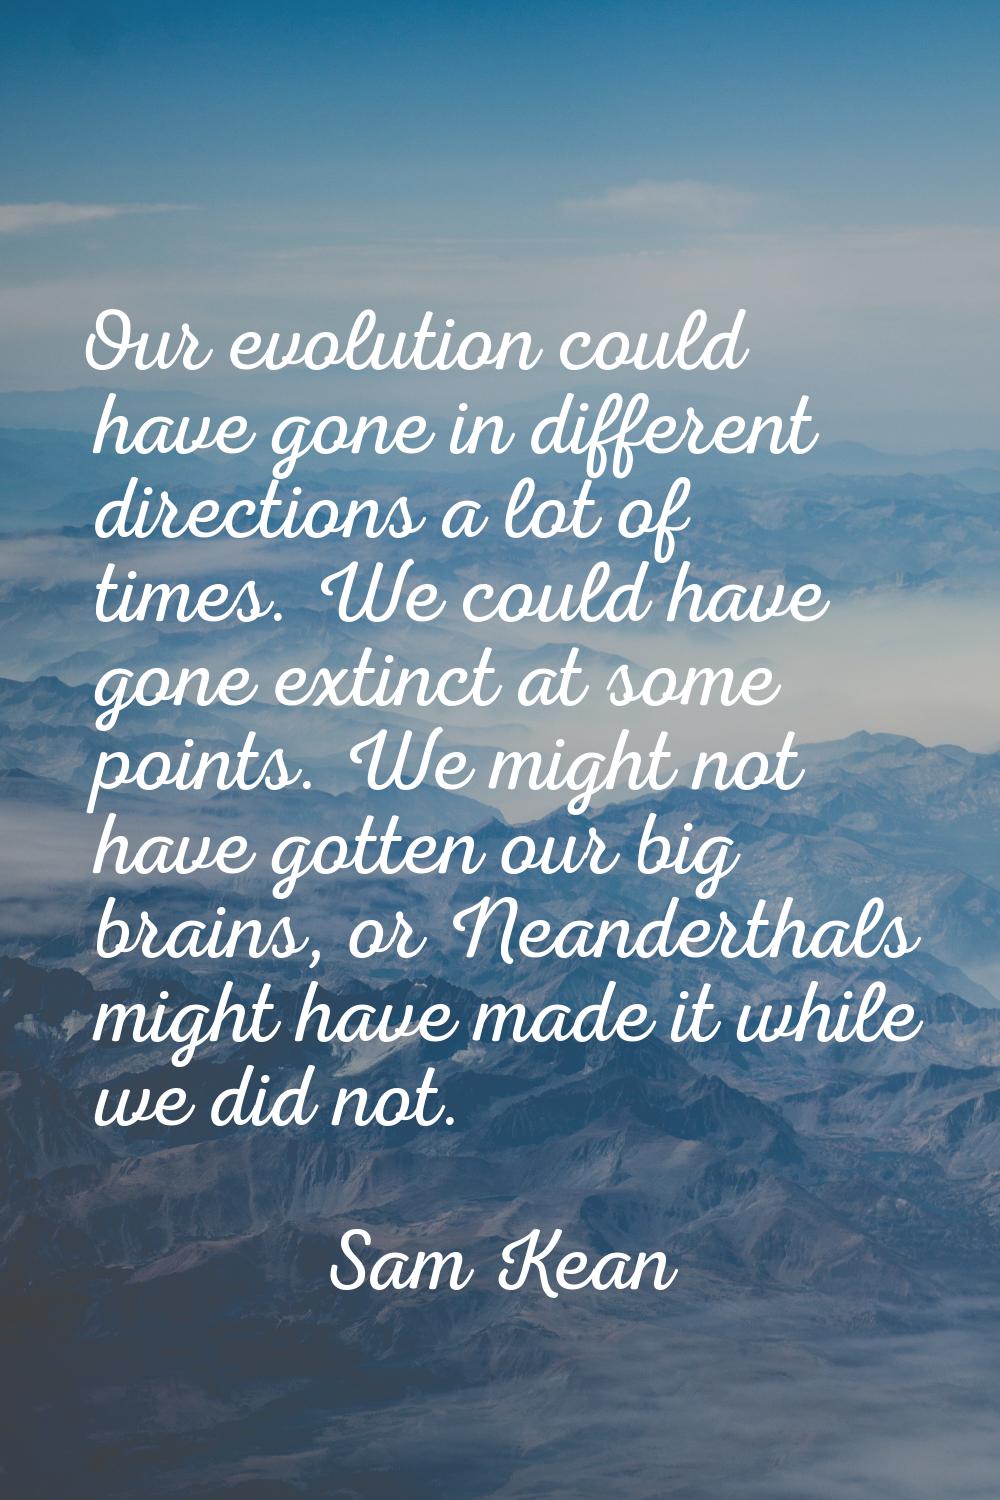 Our evolution could have gone in different directions a lot of times. We could have gone extinct at